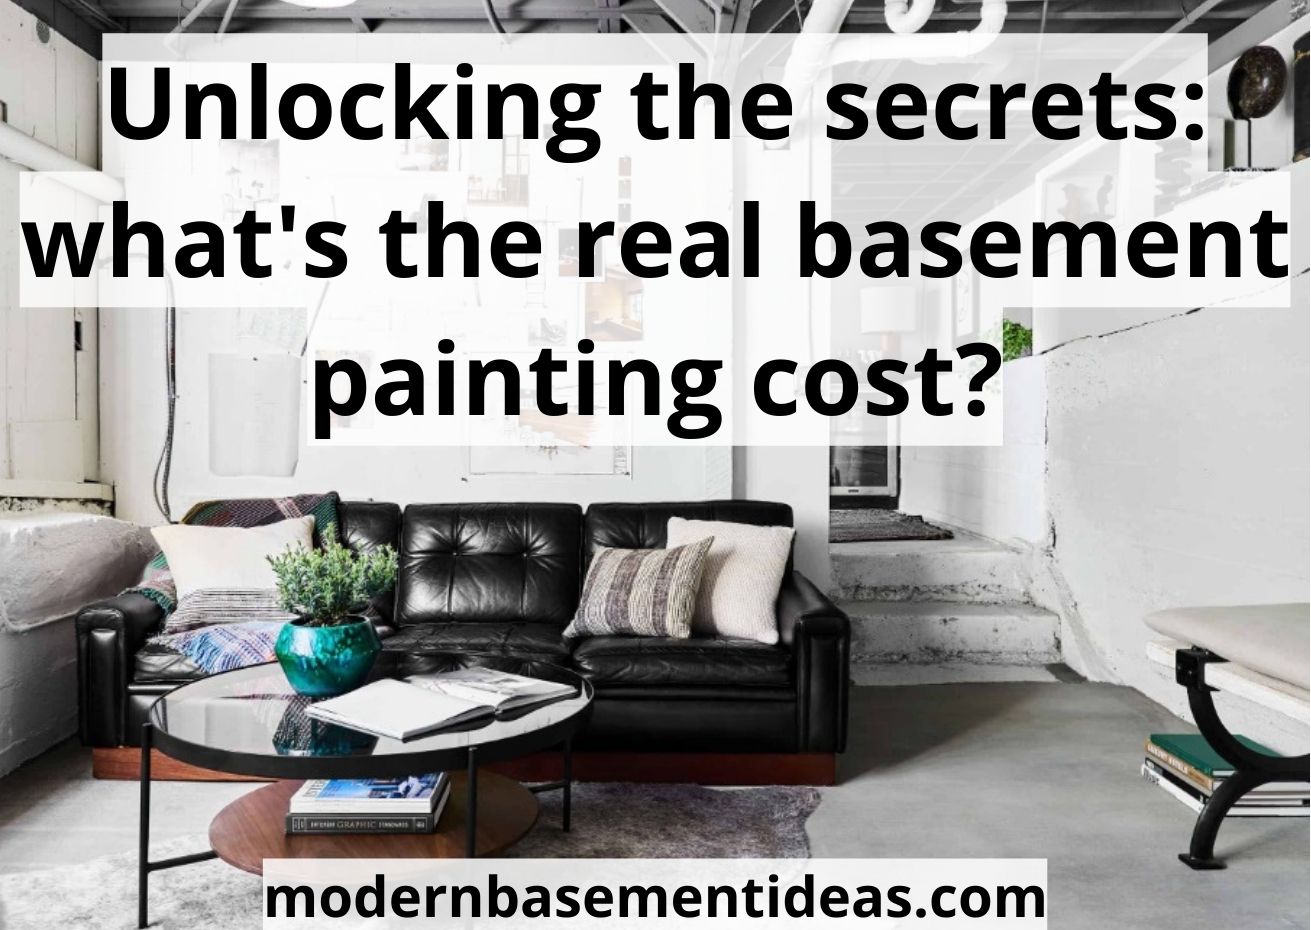 The real basement painting cost: the best analysis 2023